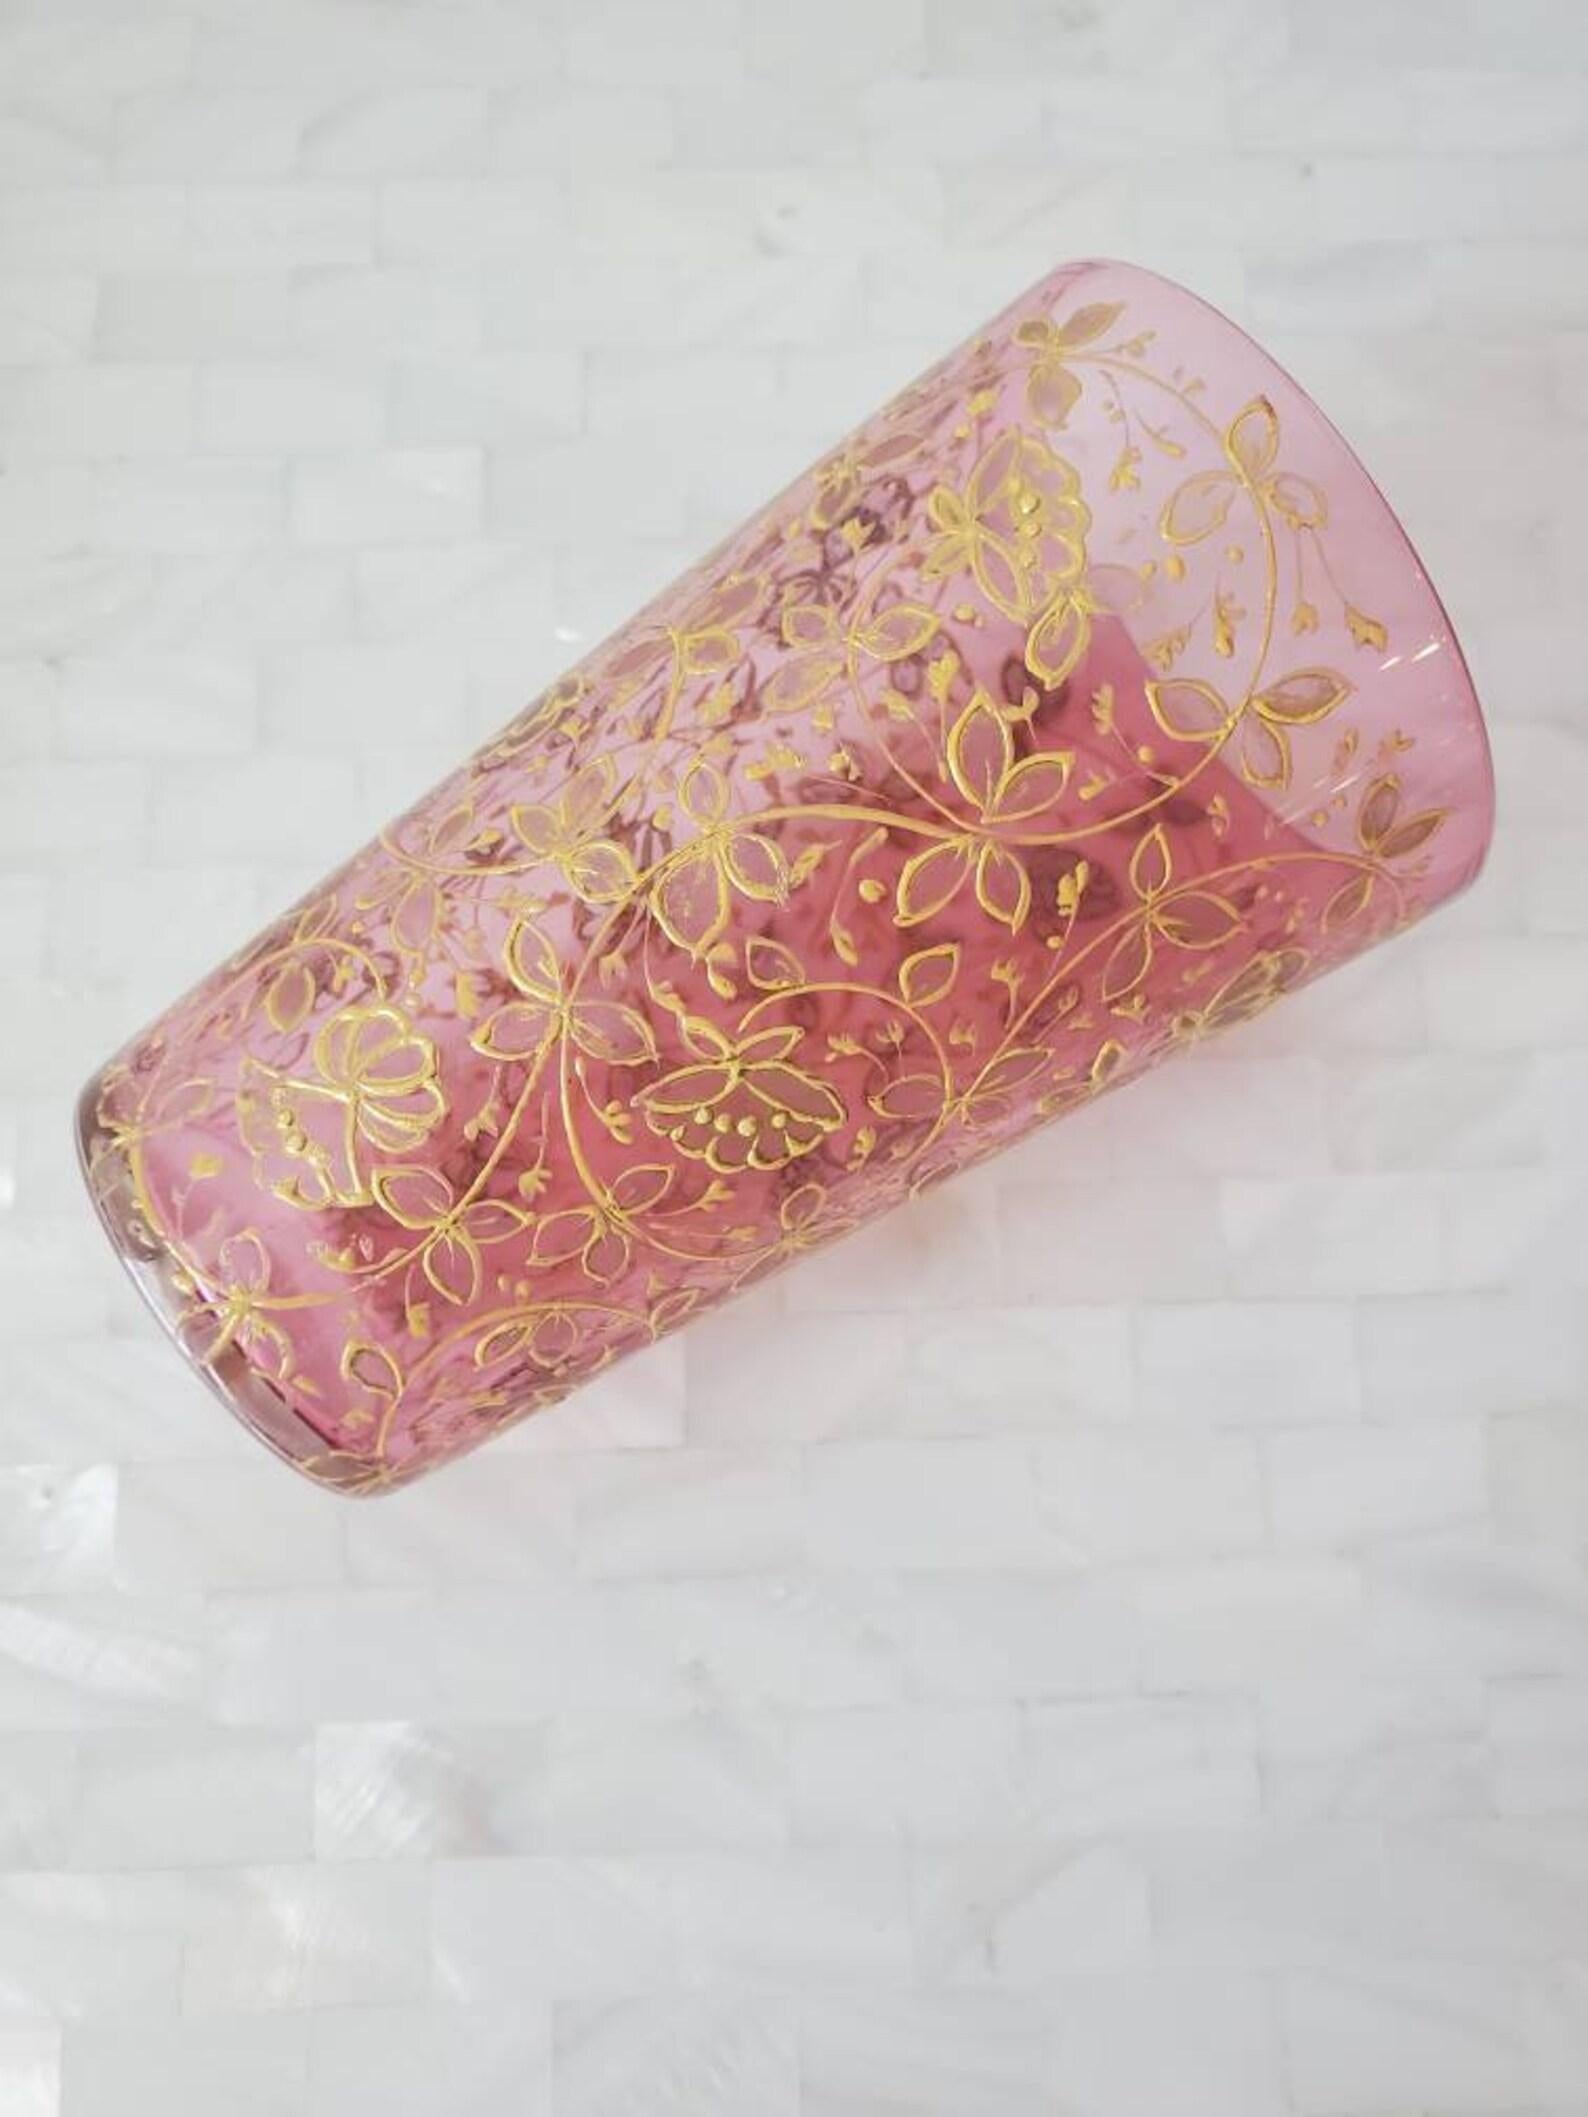 A beautiful Bohemian pink small glass fruit tumbler with exquisite applied gilt enameled decoration. Made by the Moser Glassworks factory, circa 1880 - 1930, unmarked. These tumblers are shown in the excellent book 